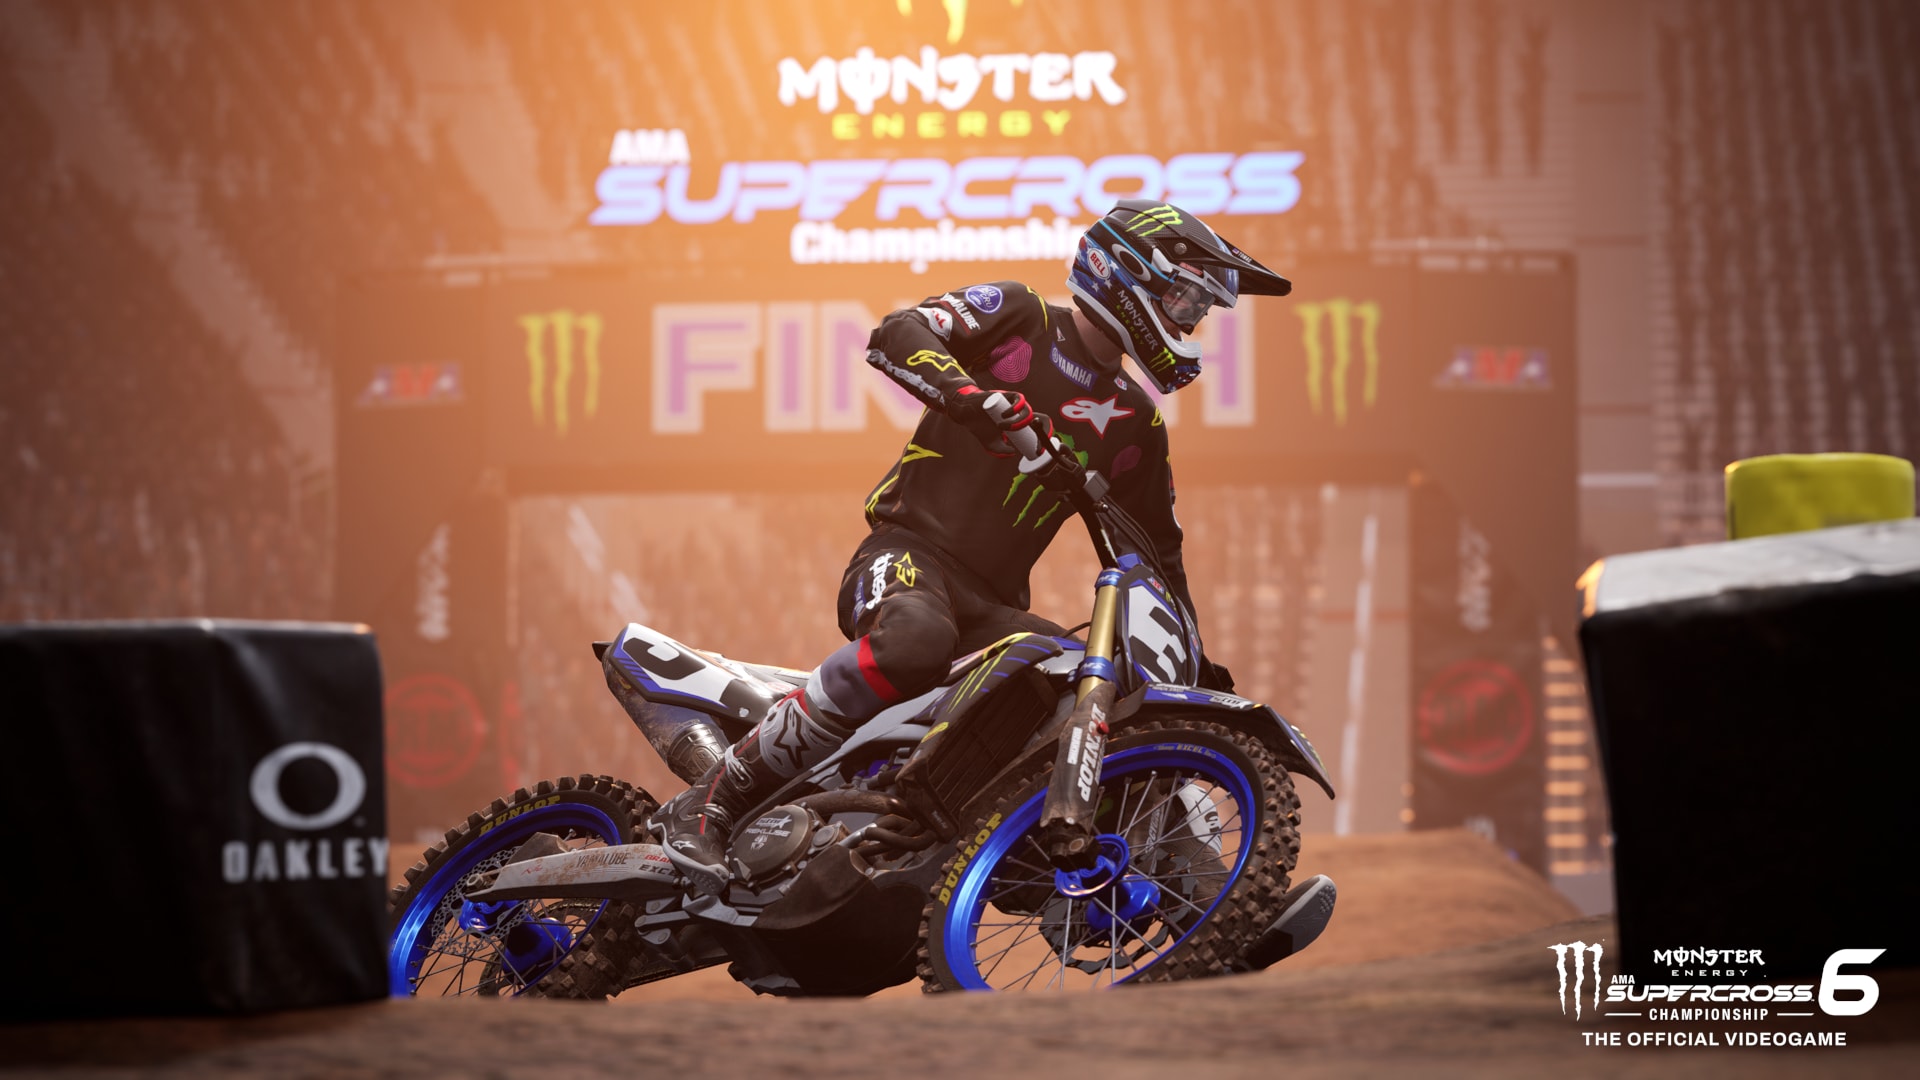 Monster Energy Supercross The Official Videogame 6 Coming to PC and